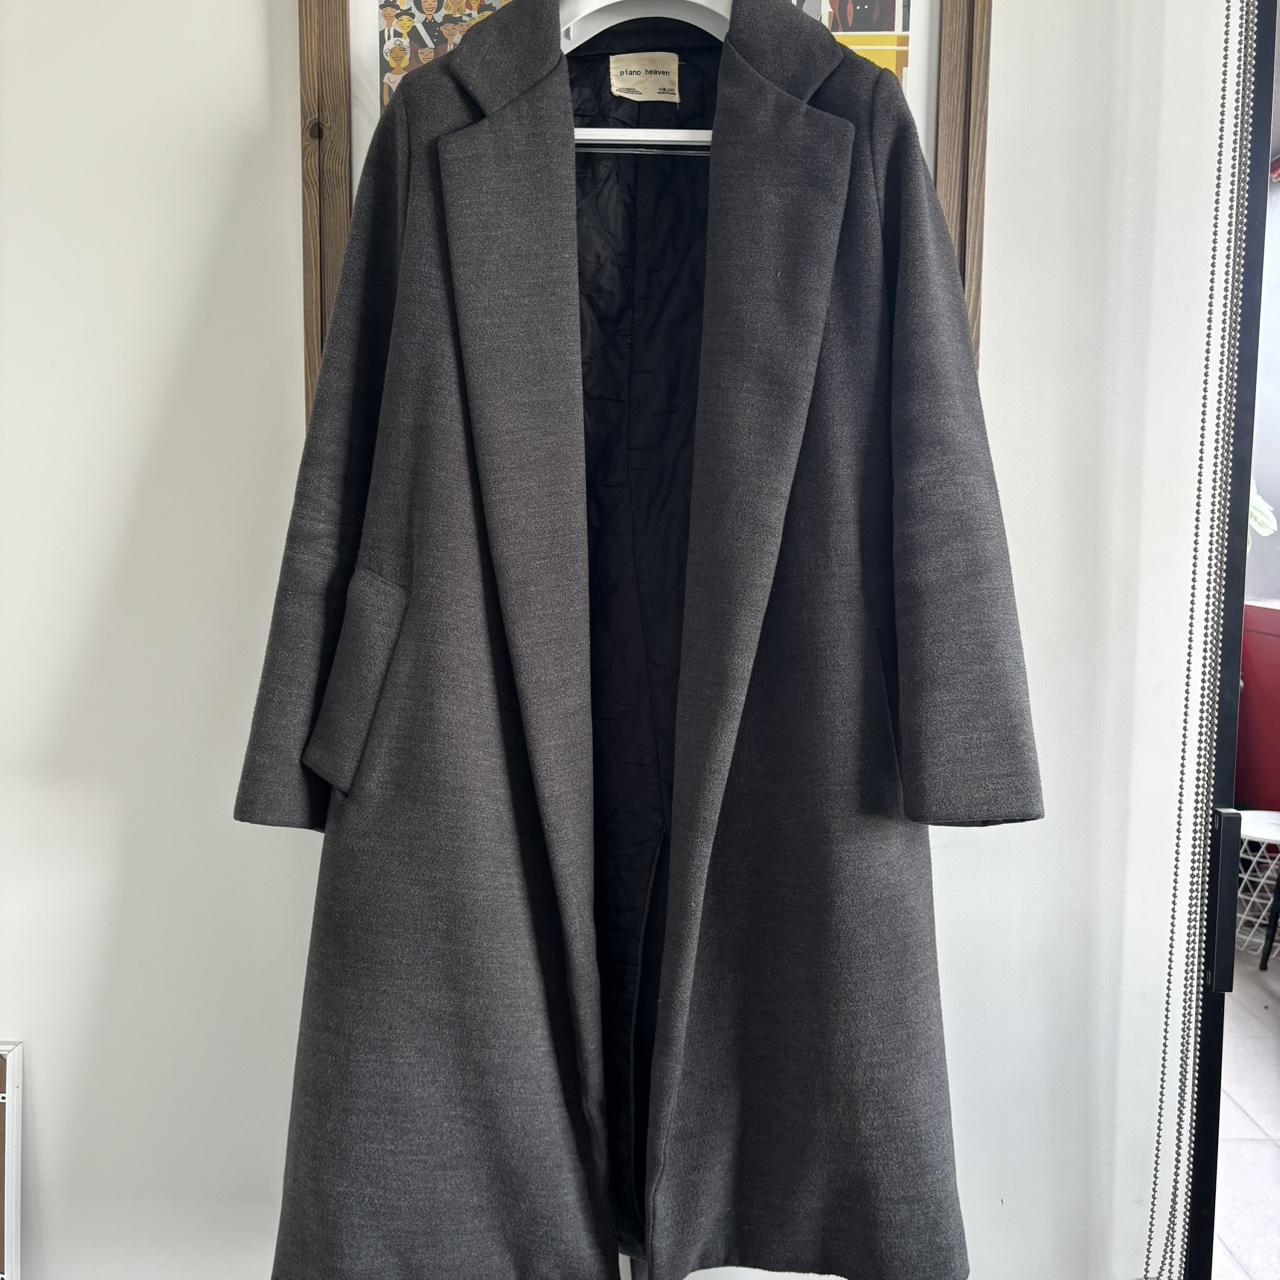 Mid Grey Coat Can be dry cleaned before selling for... - Depop